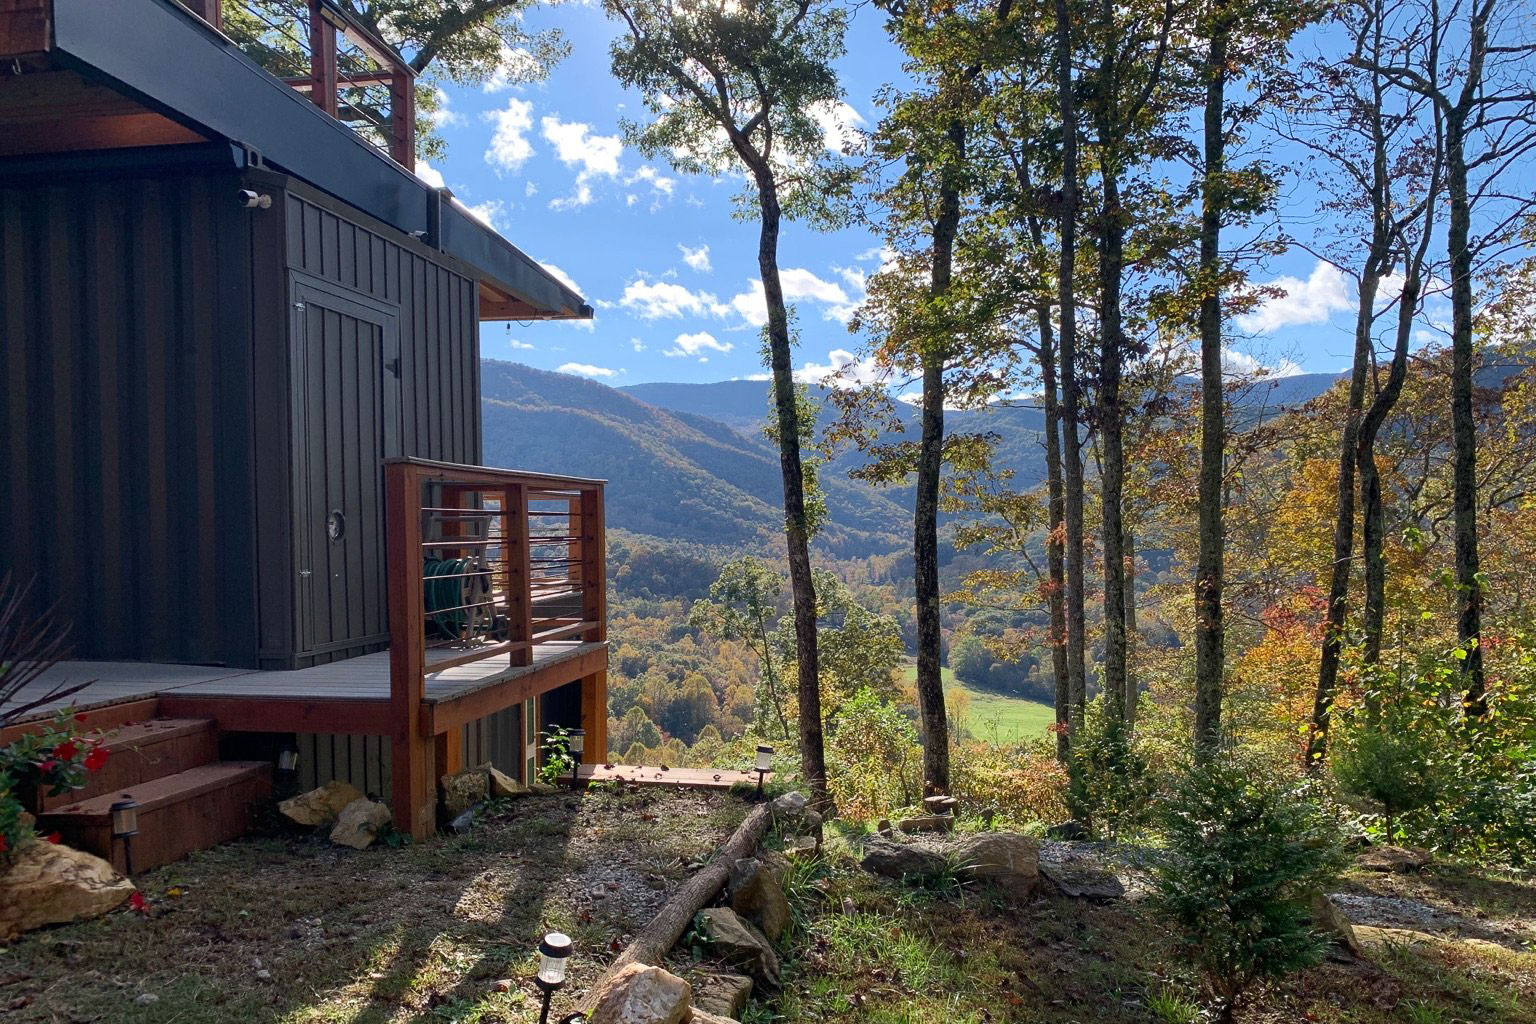 Exterior shot of a converted container cabin with views of the Appalachian hills.